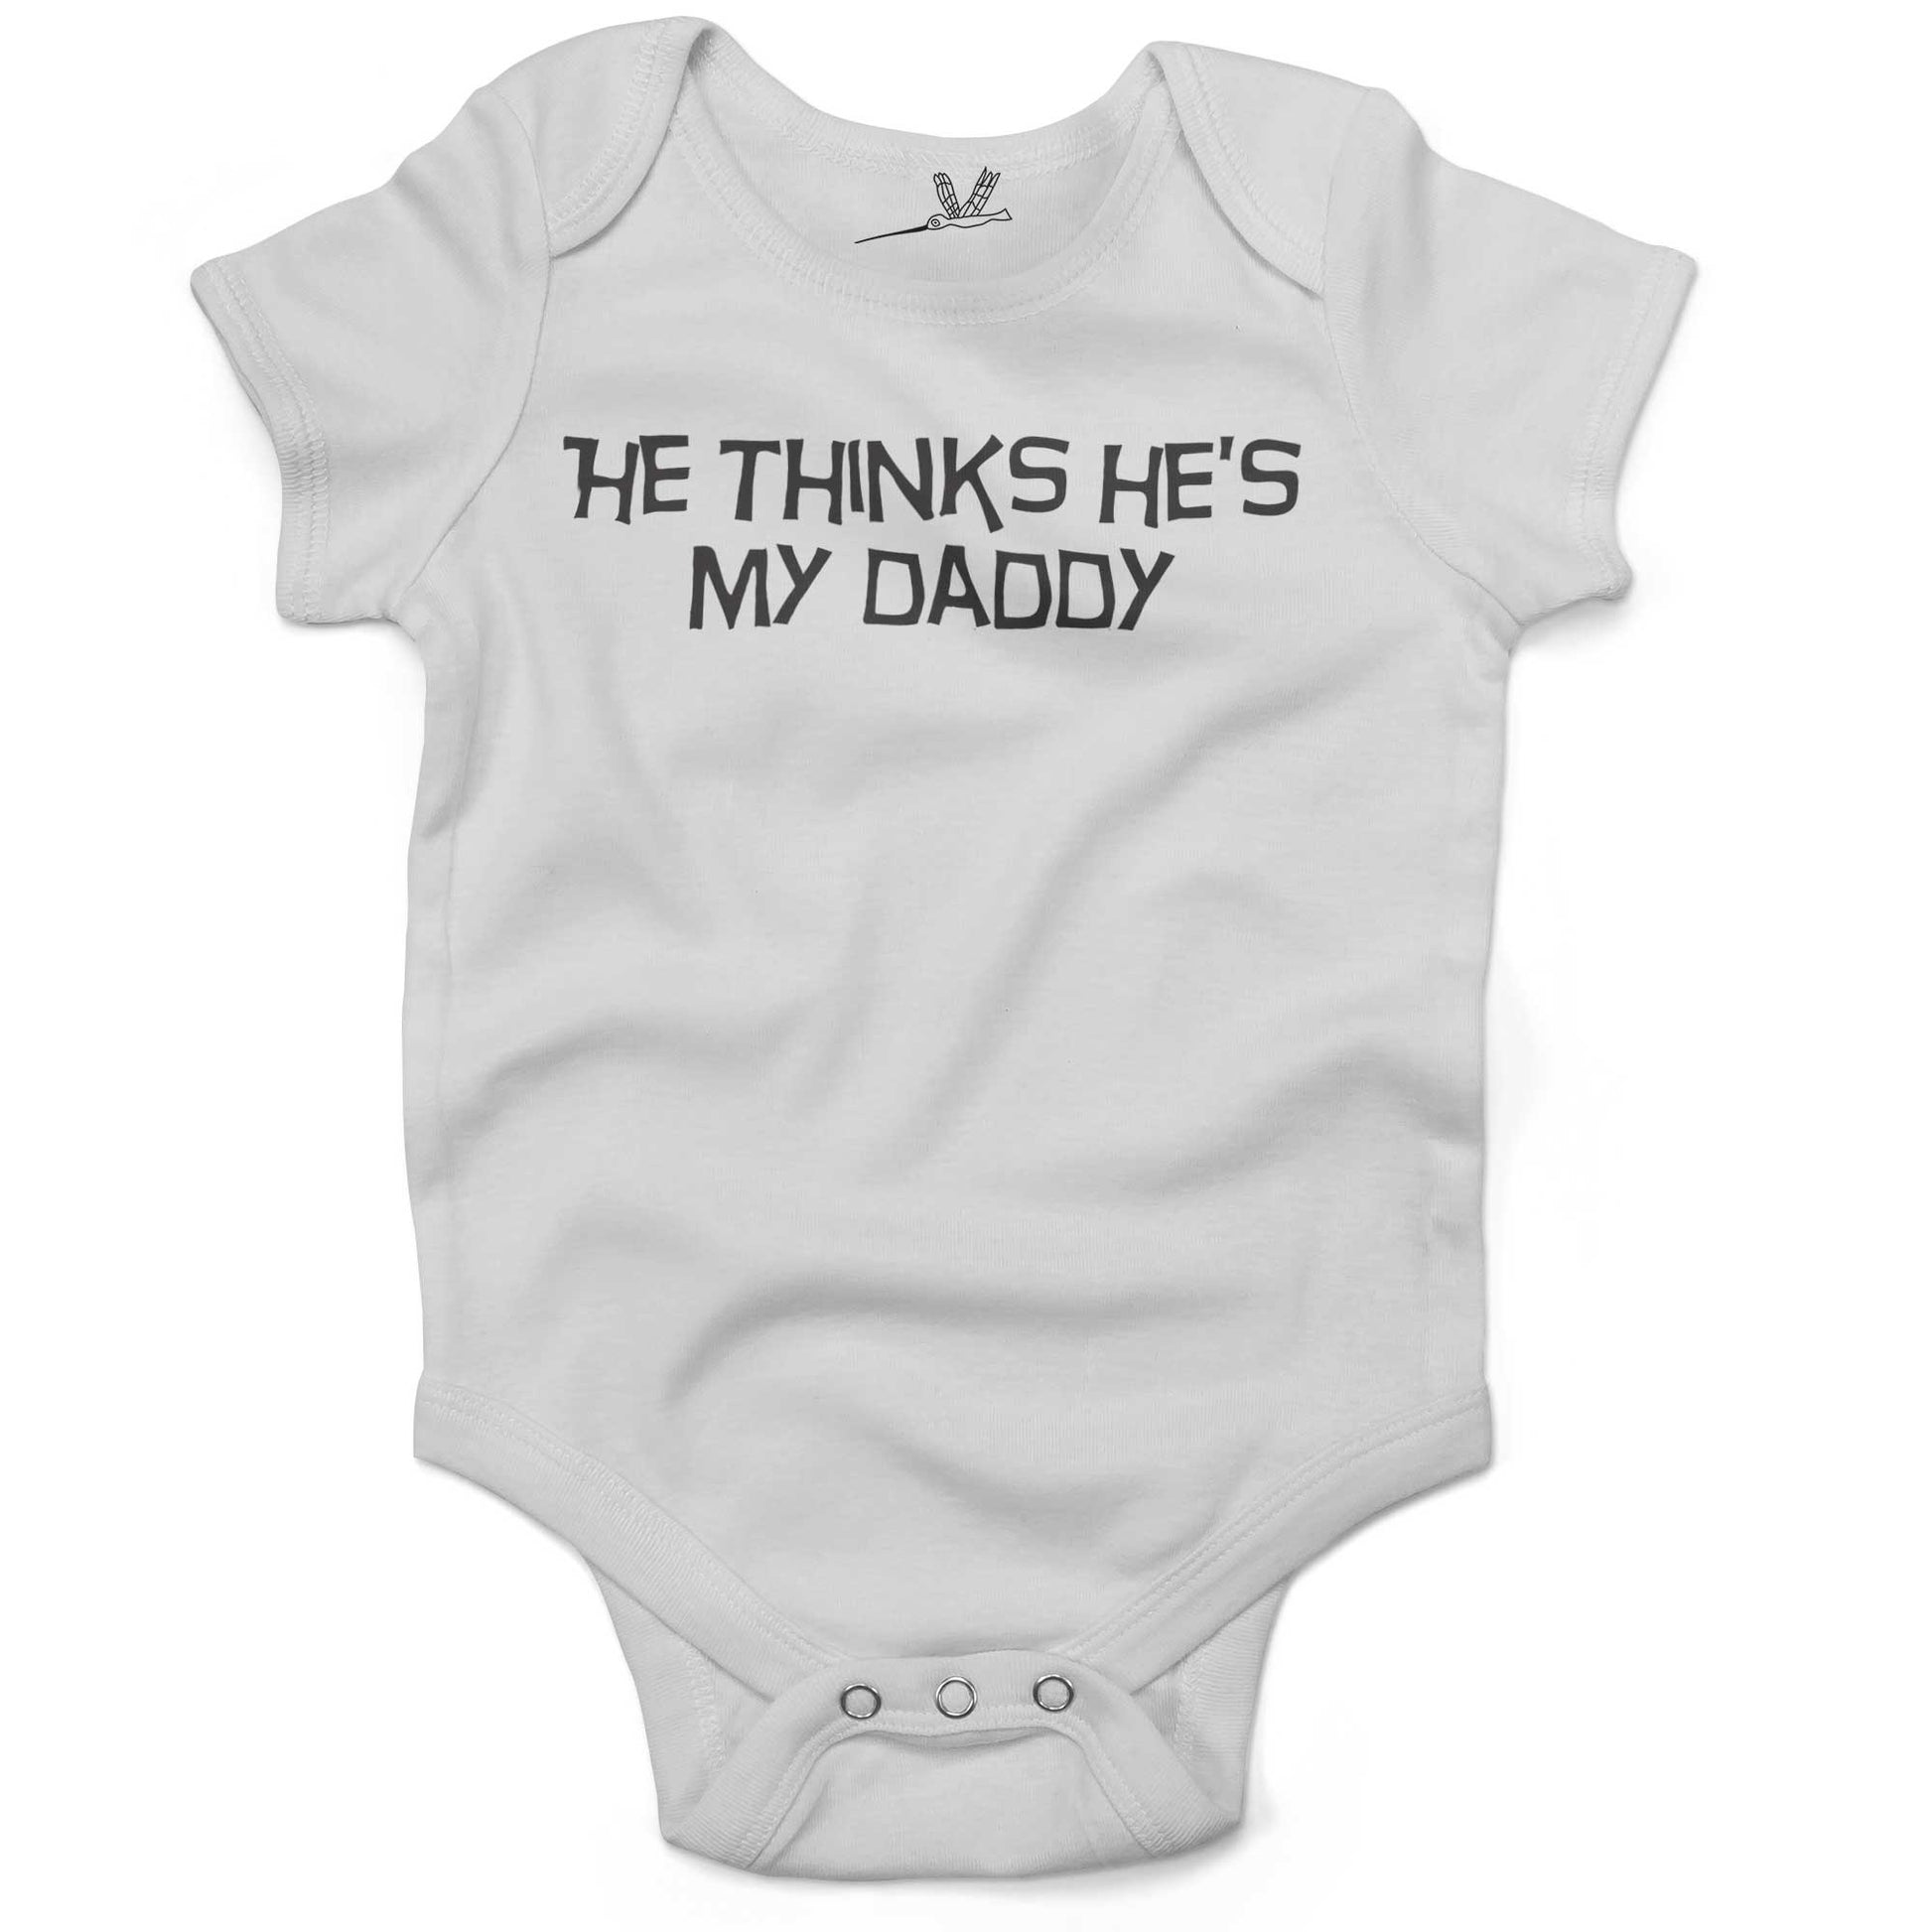 He Thinks He's My Daddy Infant Bodysuit or Raglan Tee-White-3-6 months